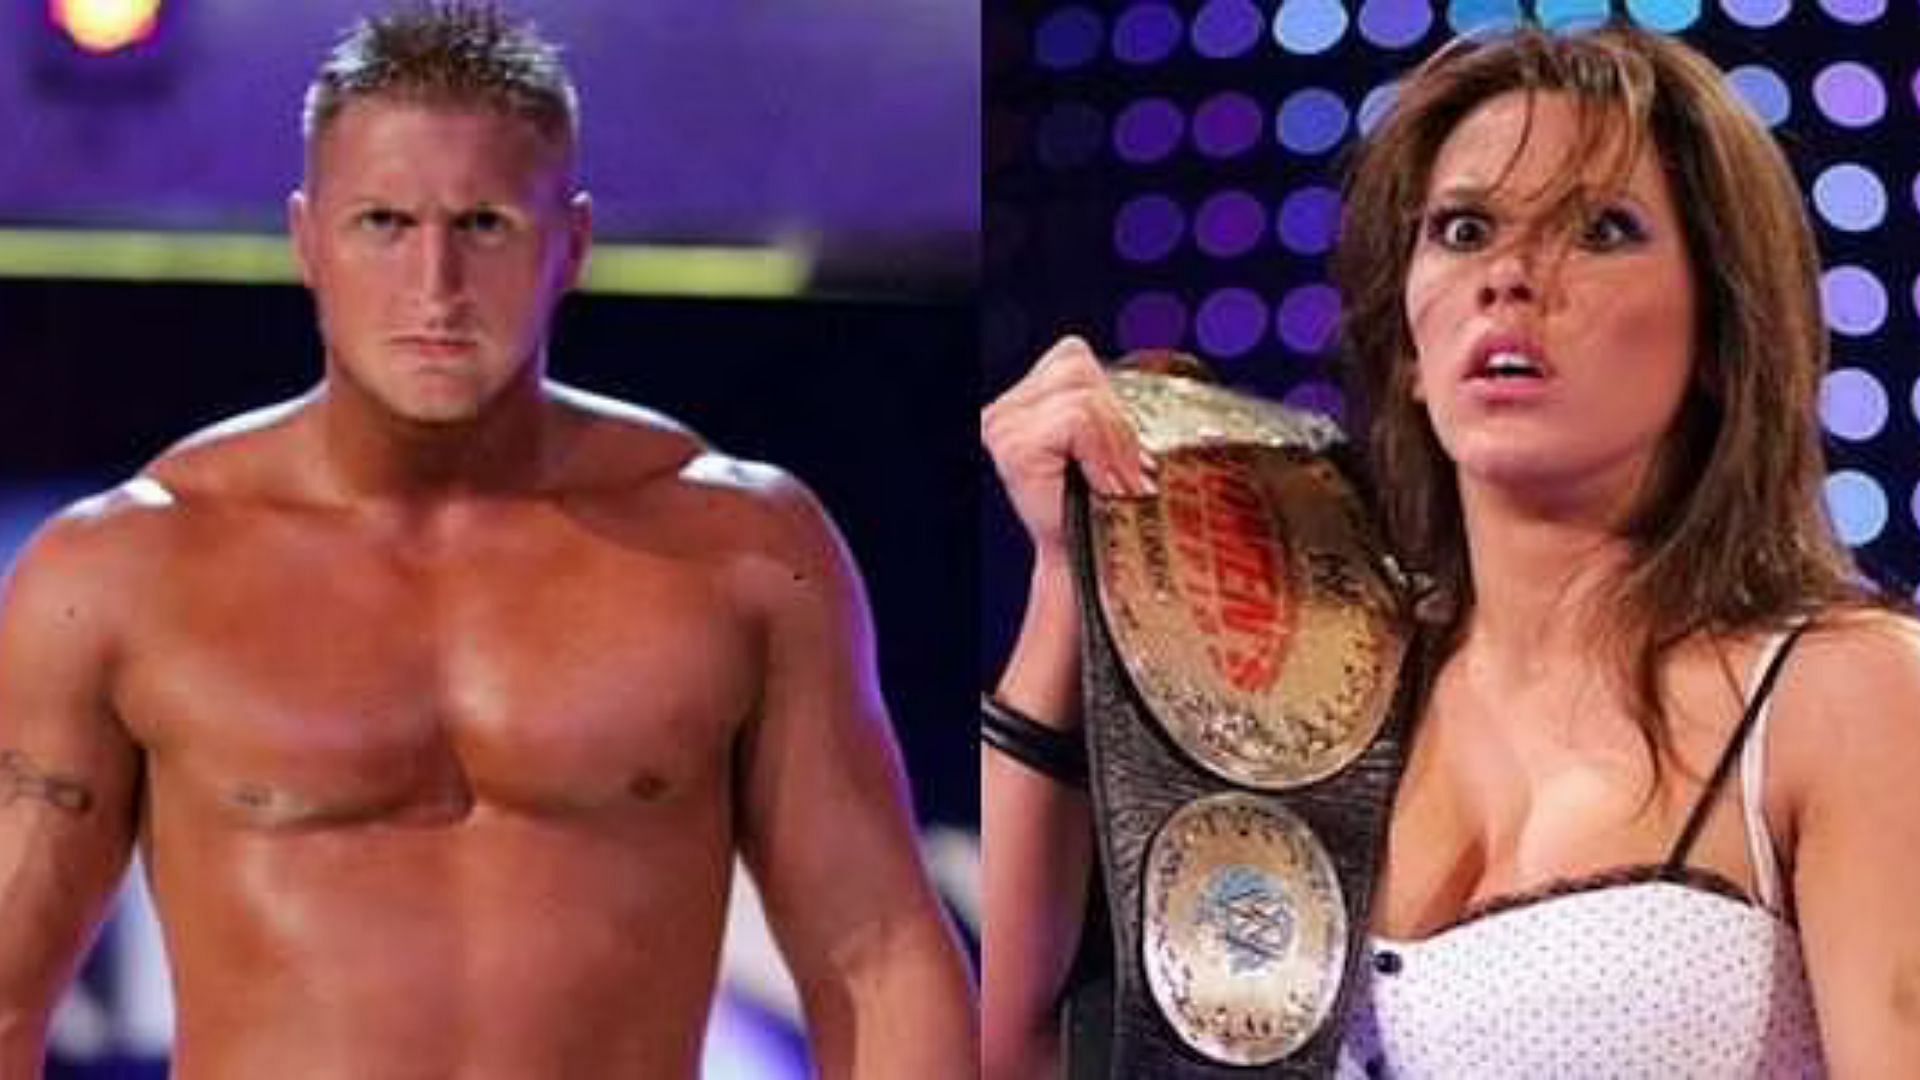 John Cena apparently came in between Kenny and Mickie James